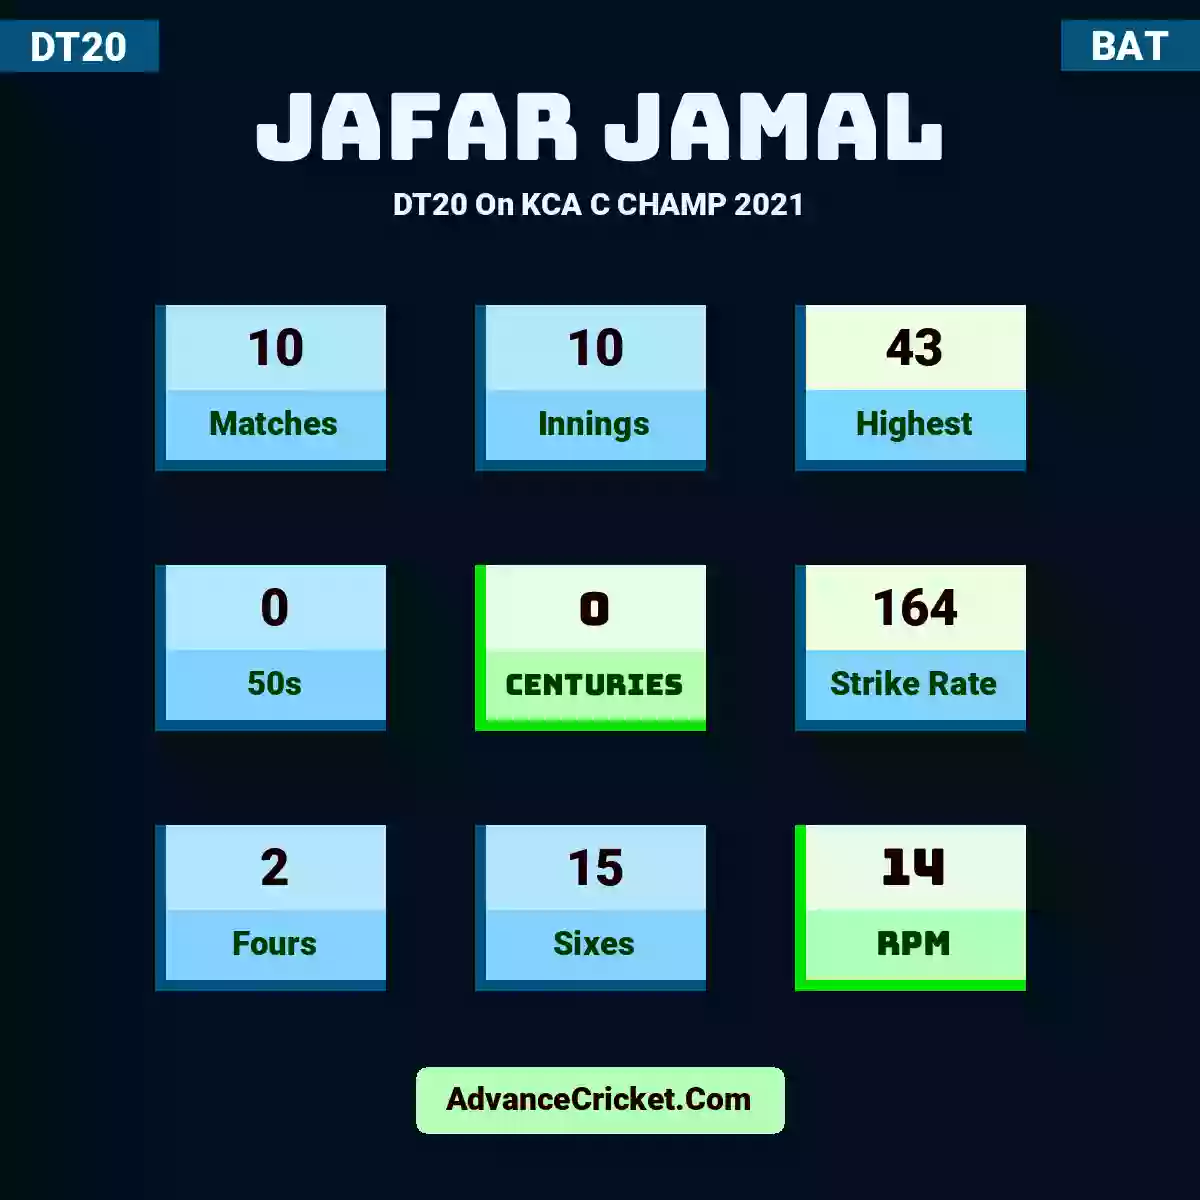 Jafar Jamal DT20  On KCA C CHAMP 2021, Jafar Jamal played 10 matches, scored 43 runs as highest, 0 half-centuries, and 0 centuries, with a strike rate of 164. J.Jamal hit 2 fours and 15 sixes, with an RPM of 14.